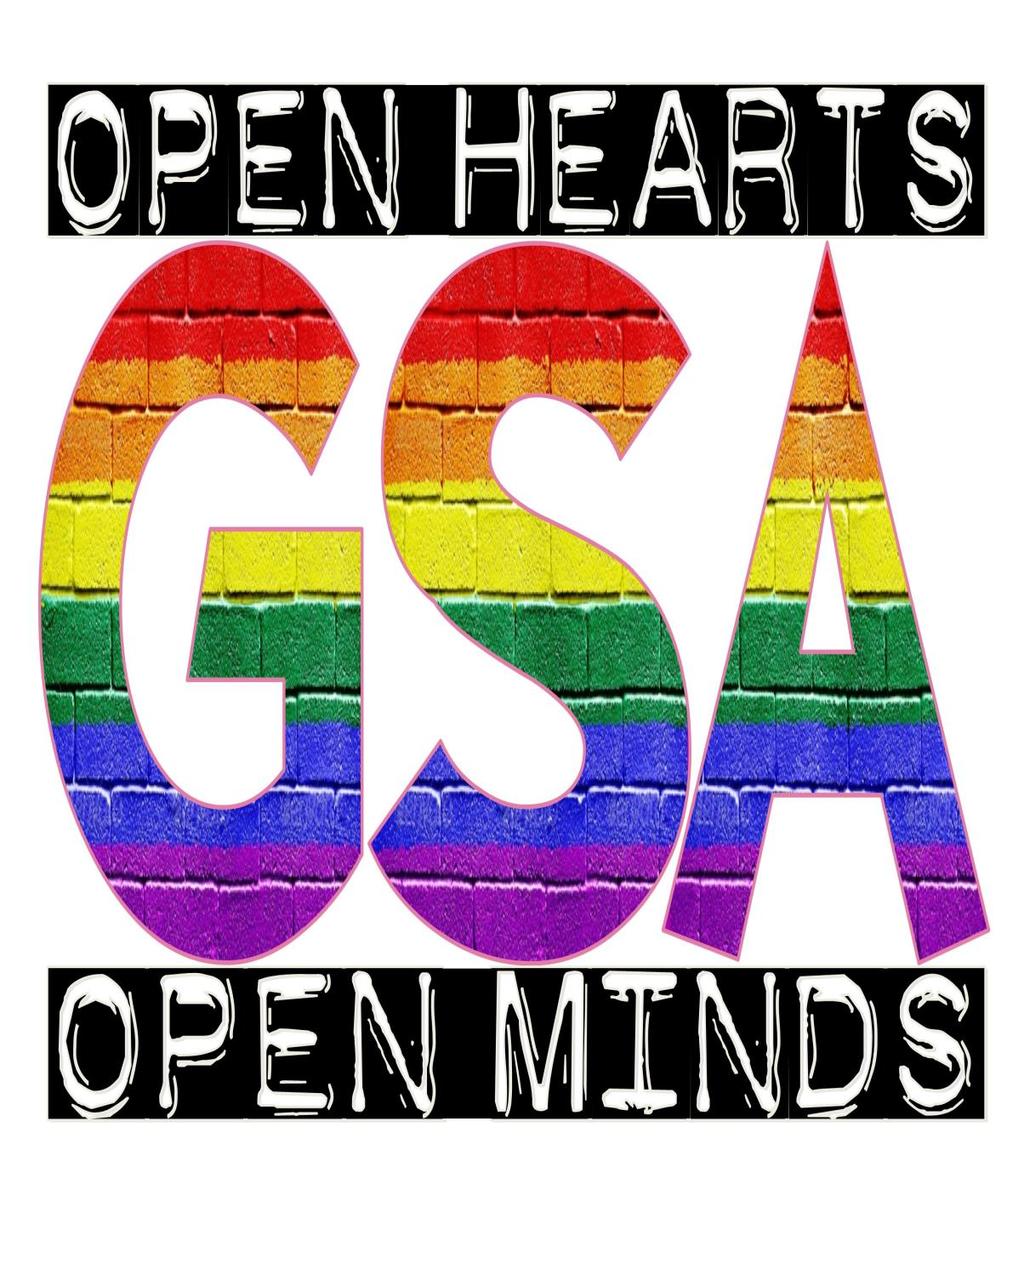 GSA will be meeting on Thursday, September 27 Topic: Game Day